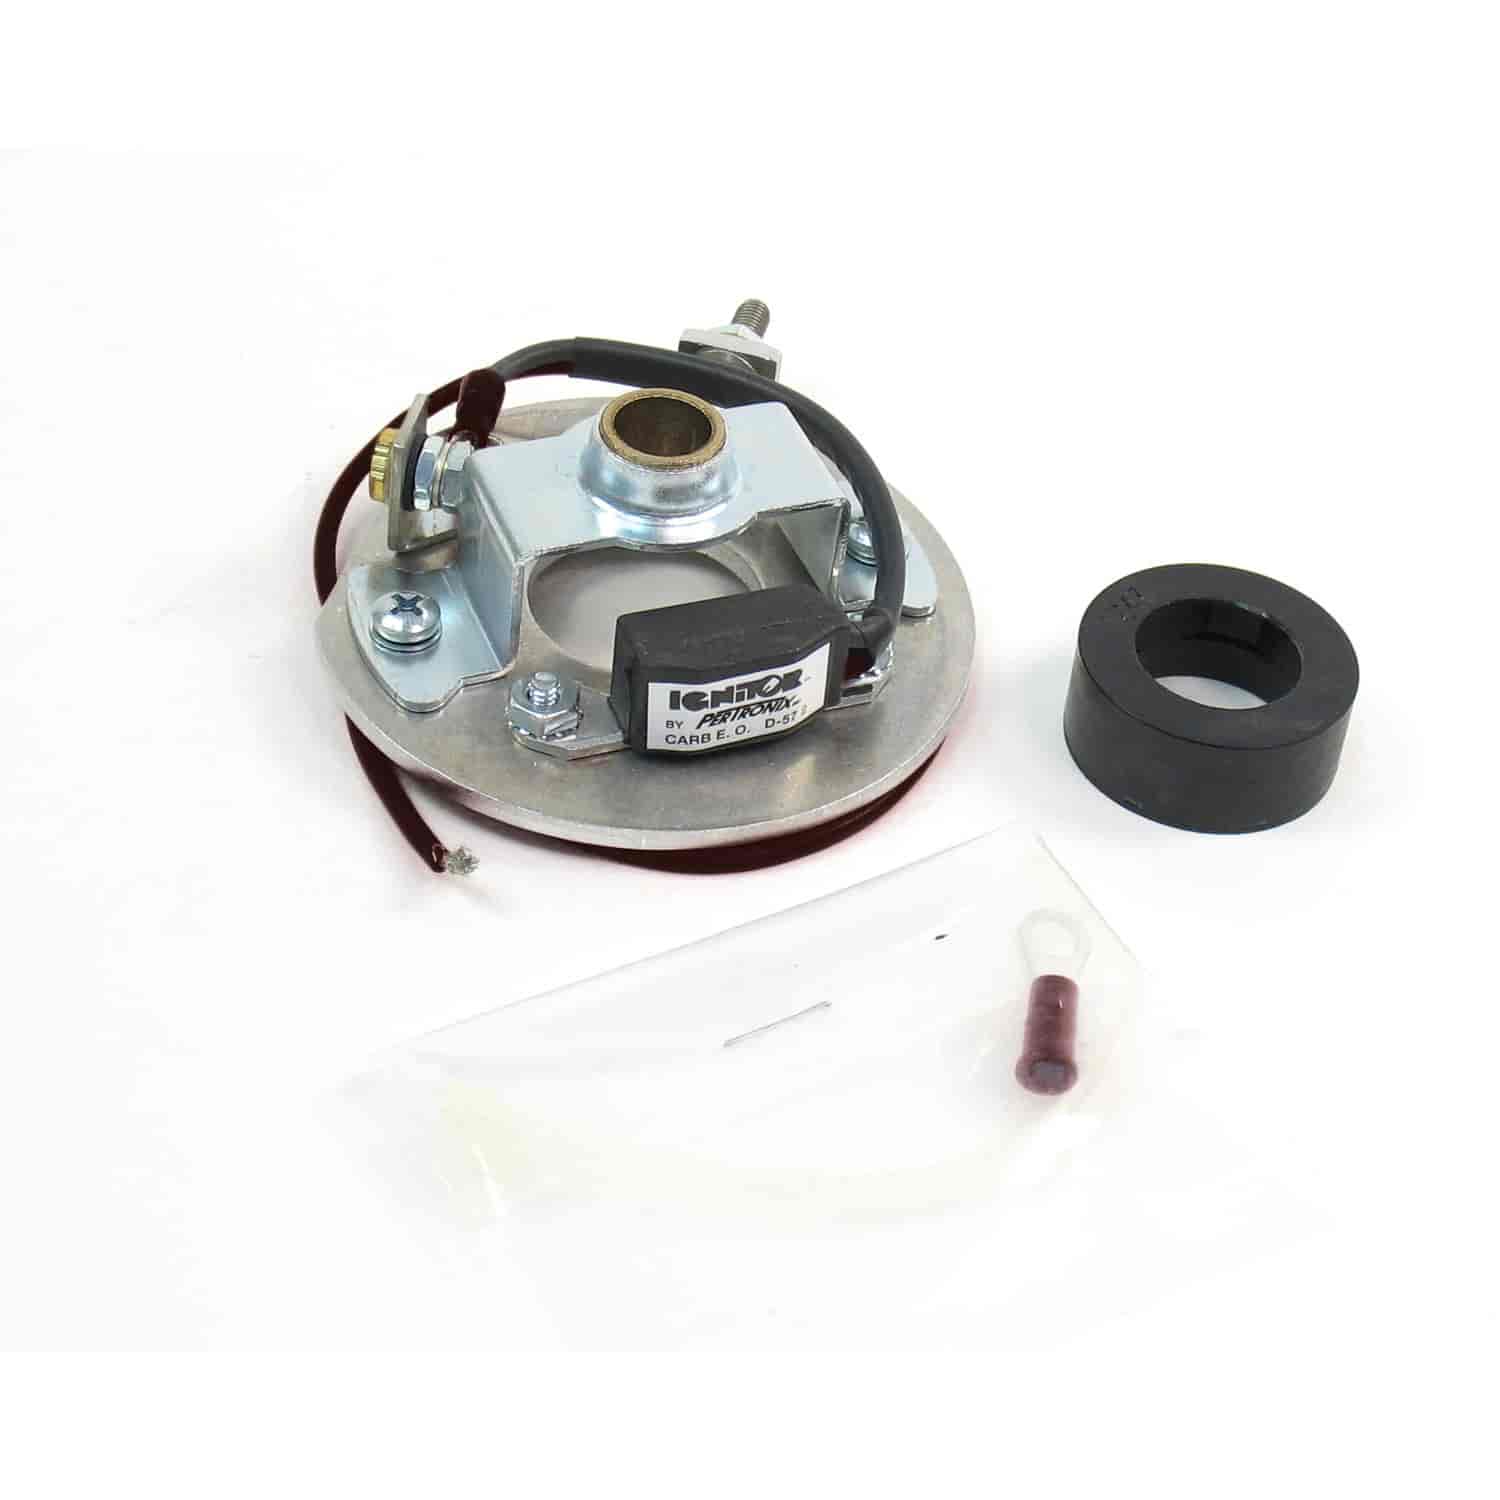 Ignitor Pos Grd 12v 4 cyl Carb Approved D-57-22